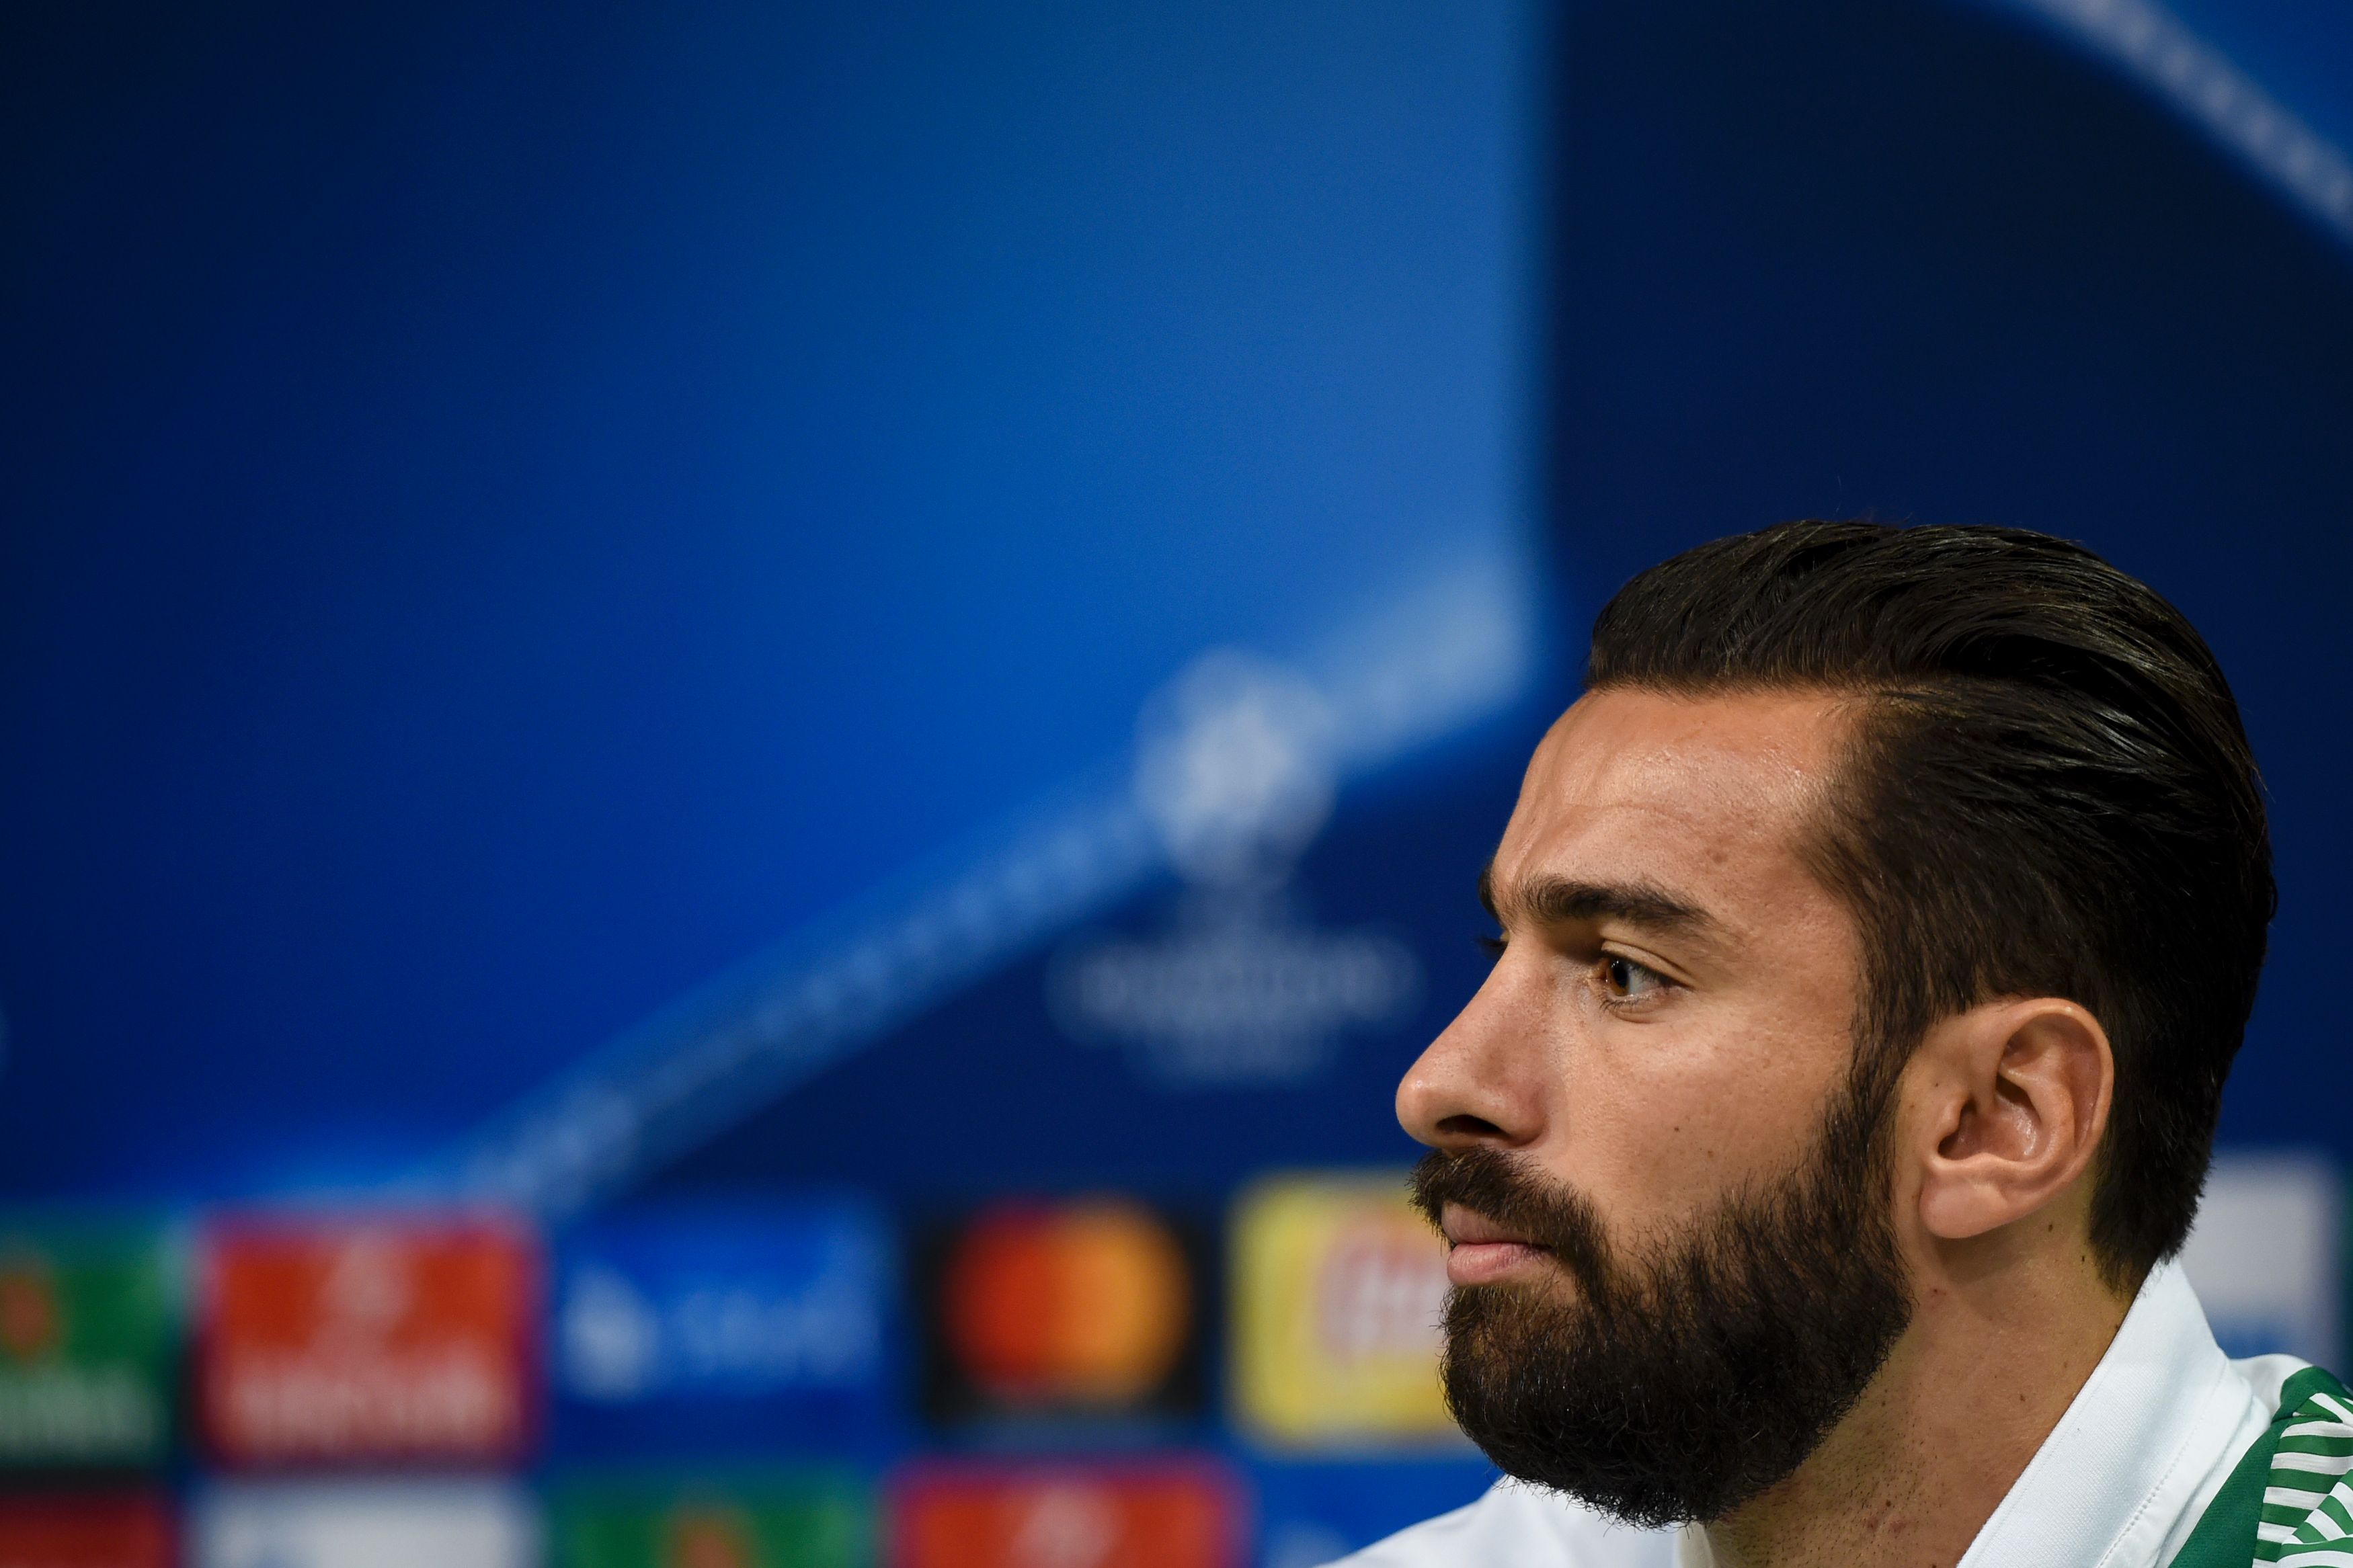 Sporting's goalkeeper Rui Patricio attends a press conference at Alvalade stadium in Lisbon on November 21, 2016, on the eve of the UEFA Champions League group F football match Sporting CP vs Real Madrid.  / AFP / PATRICIA DE MELO MOREIRA        (Photo credit should read PATRICIA DE MELO MOREIRA/AFP/Getty Images)